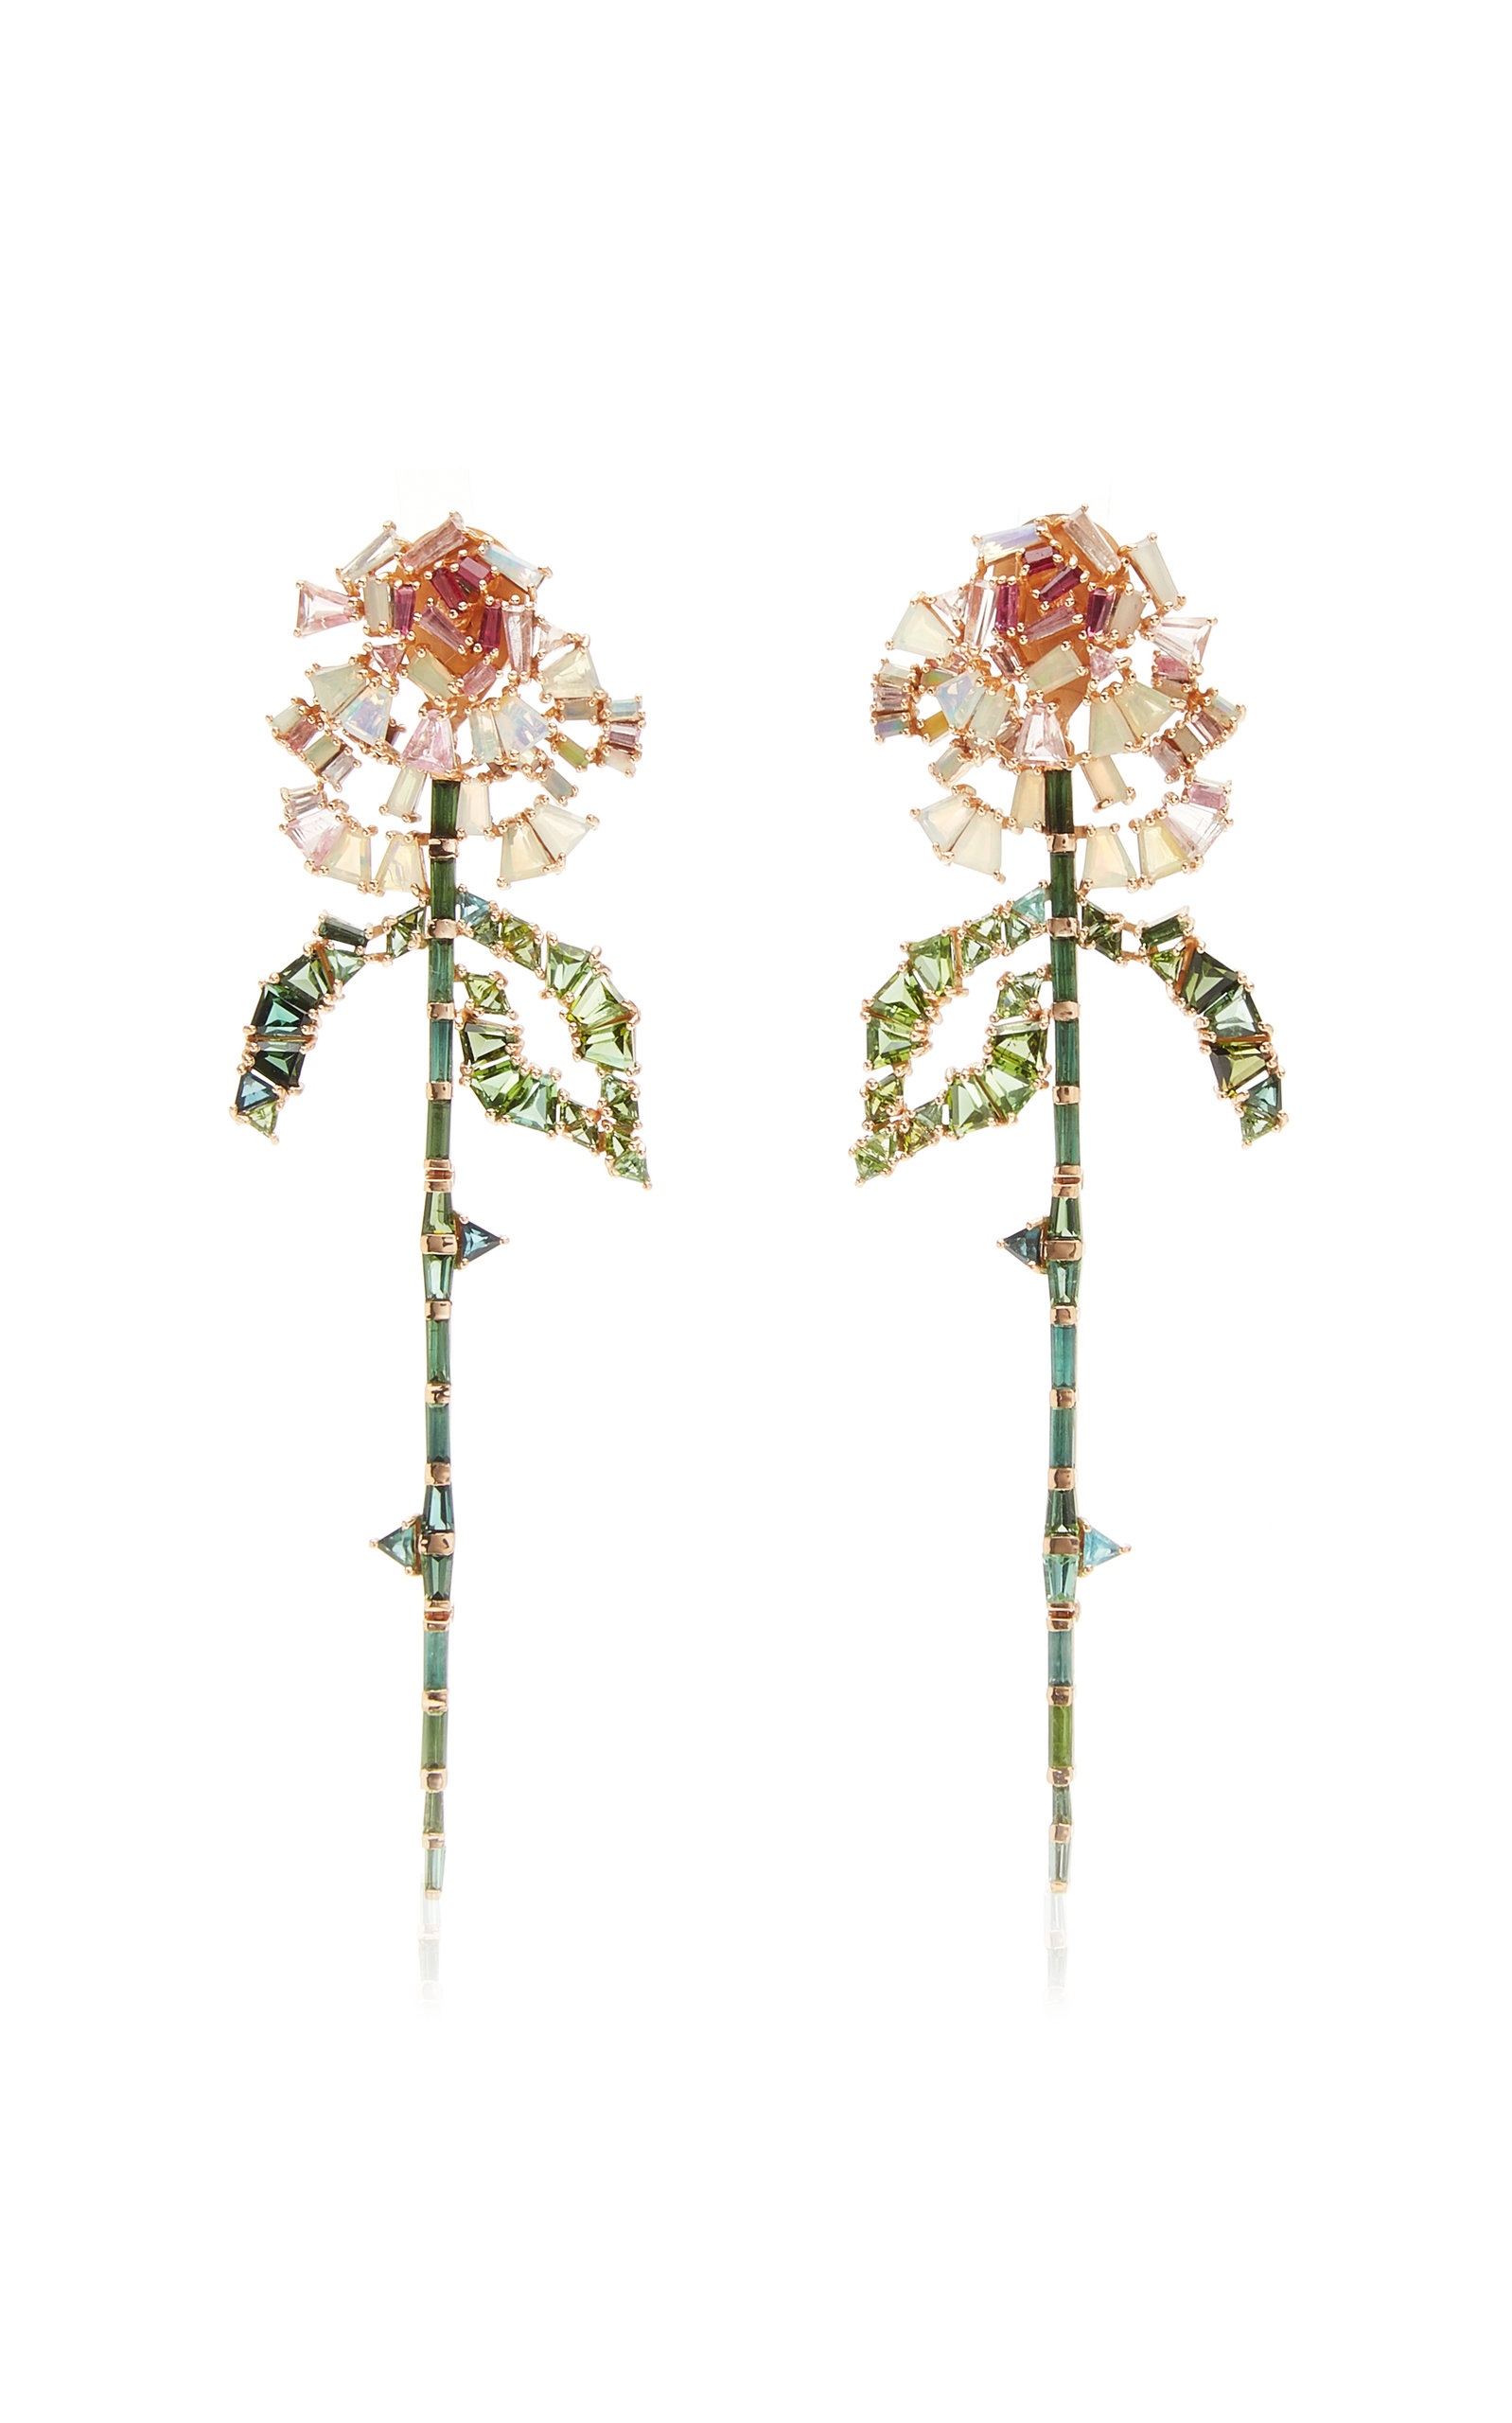 20K Recycled Rose Gold Rose and Stem Earrings